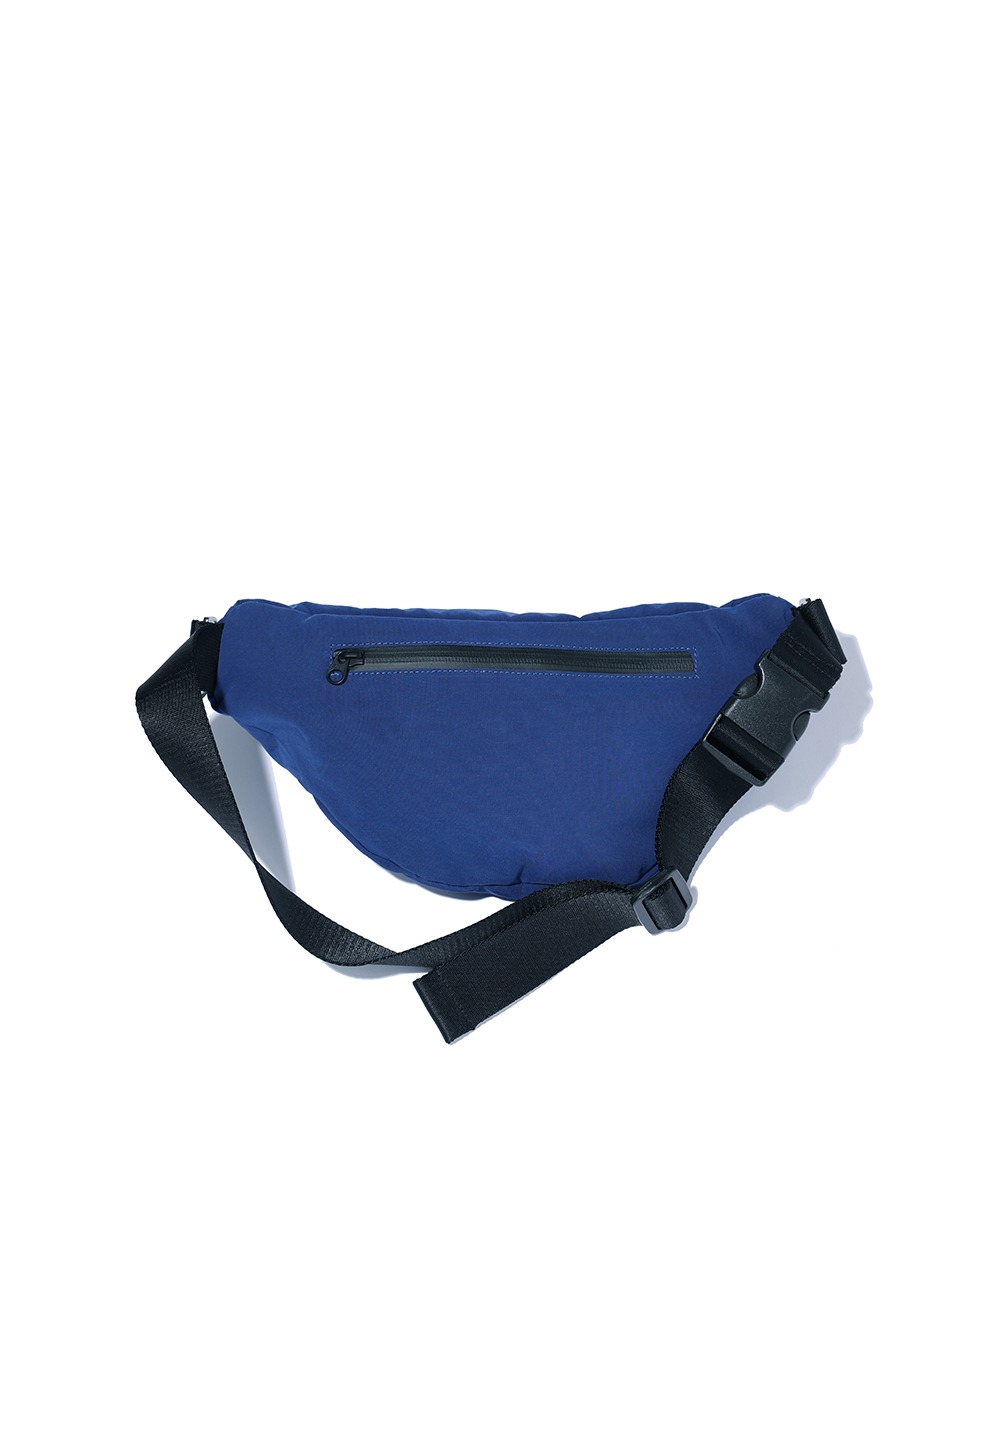 Fanny pack - BLUE